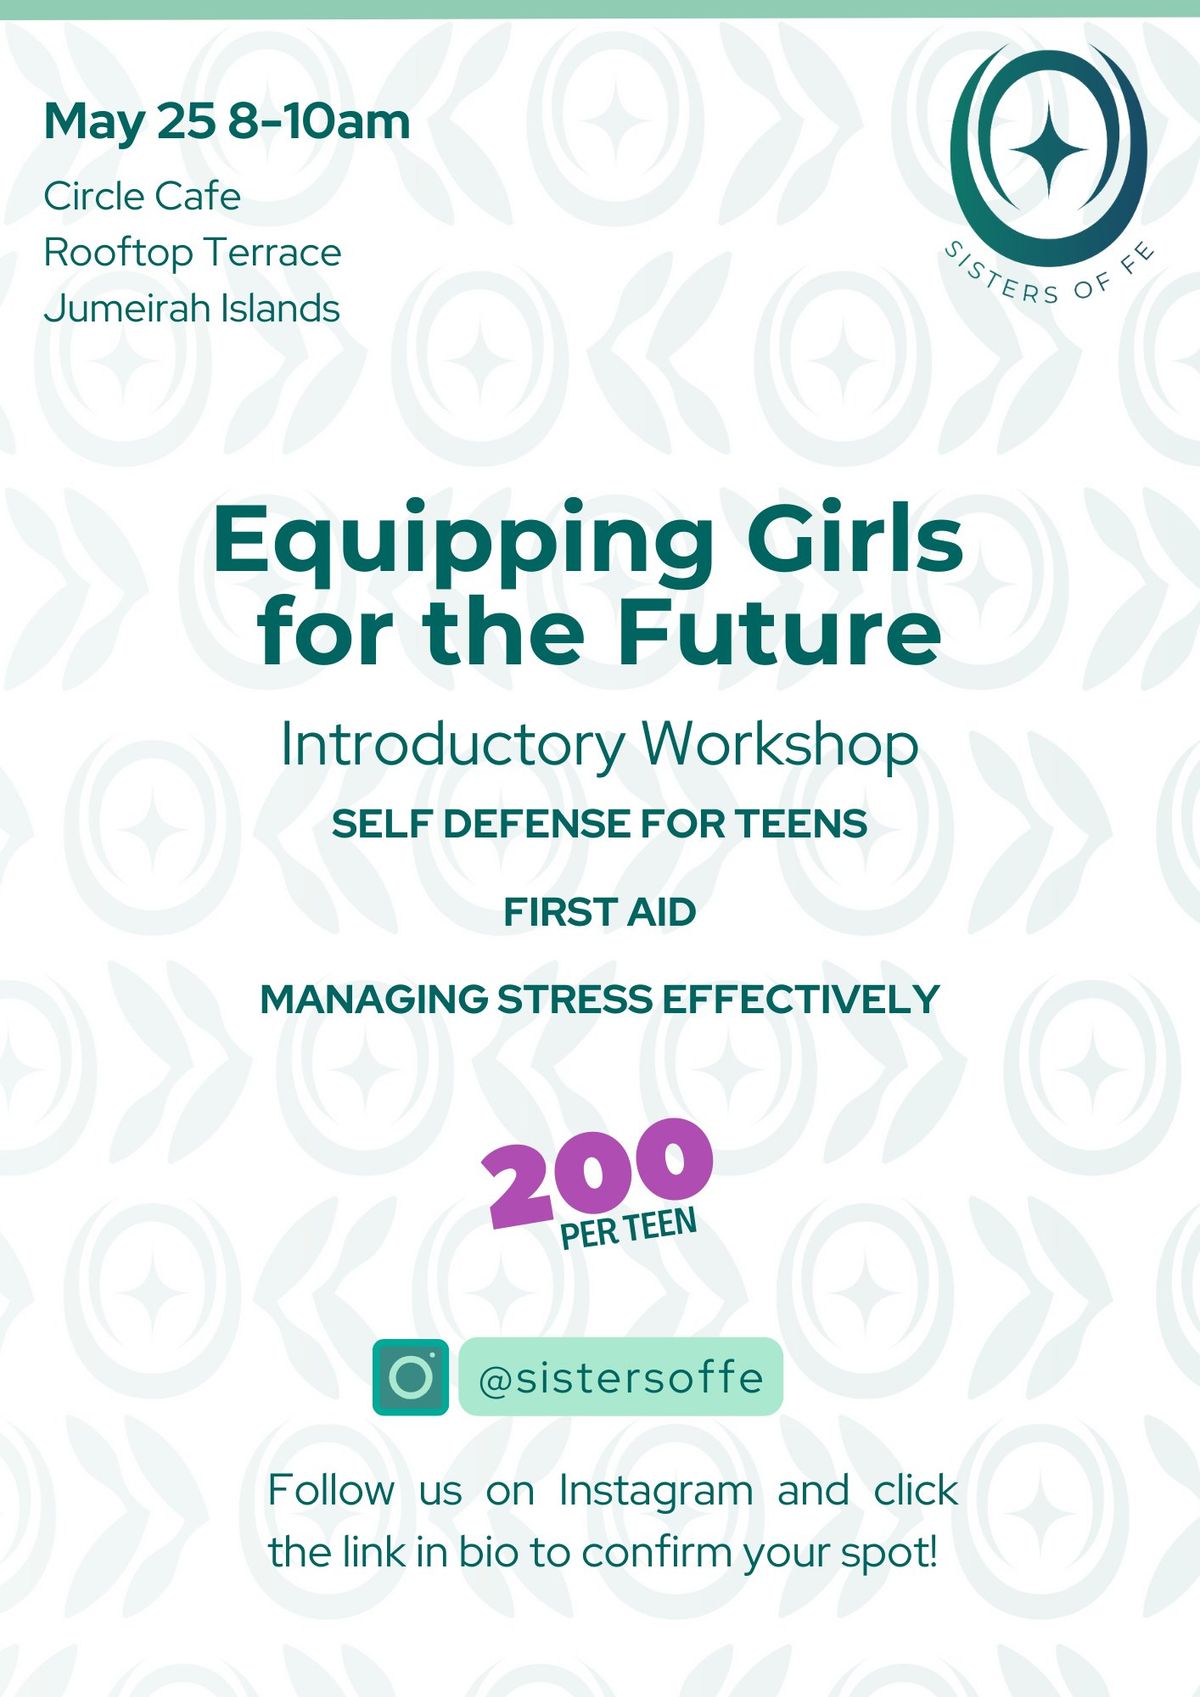 Introductory Workshop - Equipping Girls for the Future